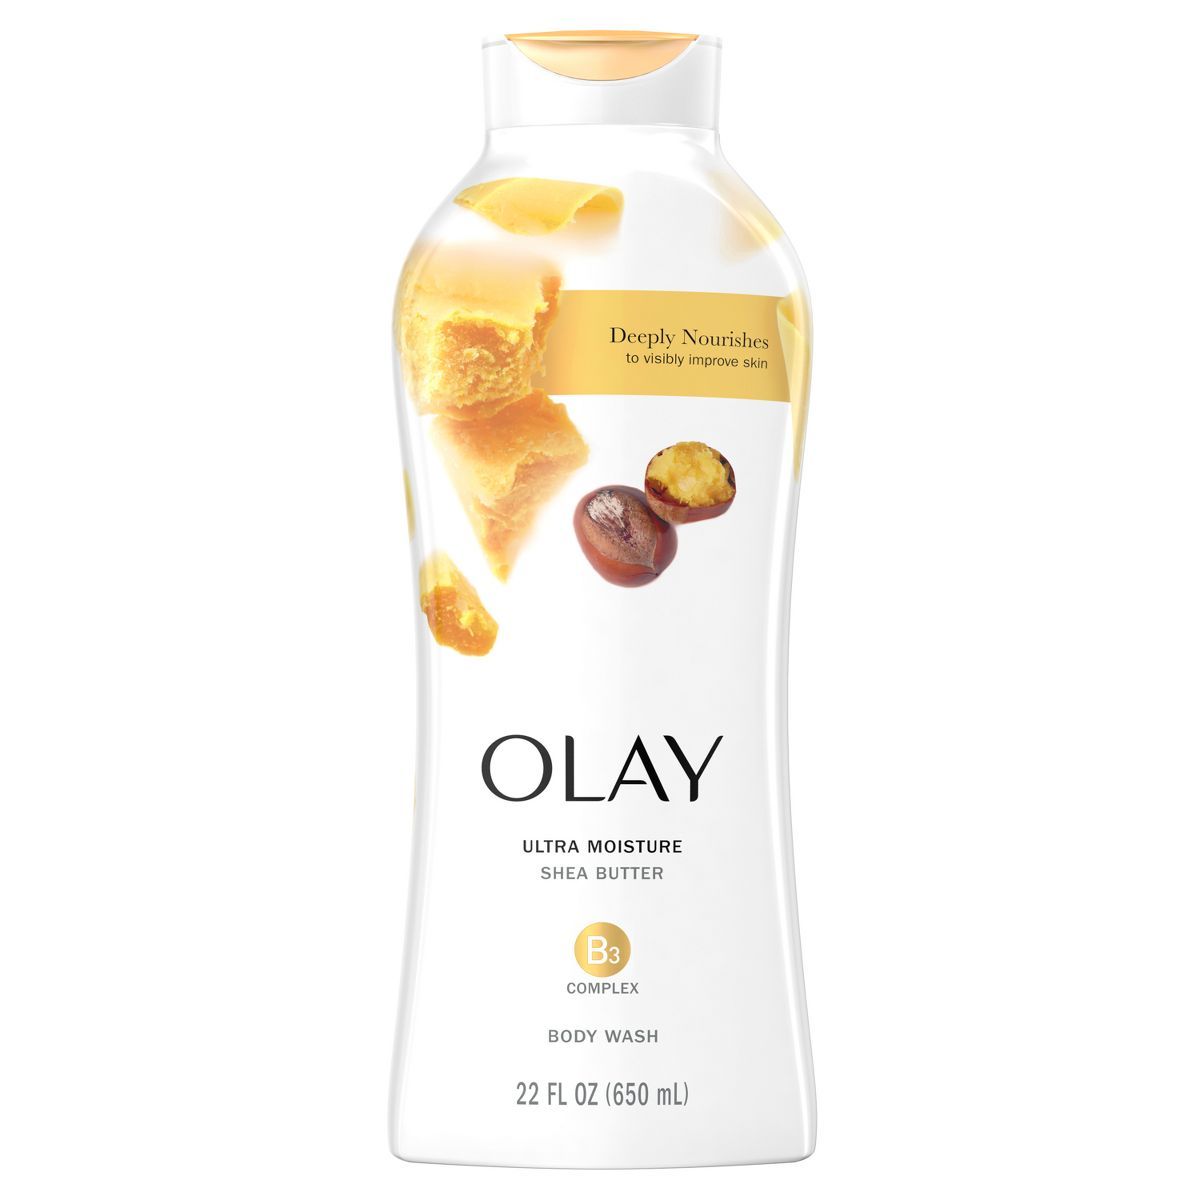 Olay Ultra Moisture Body Wash with Shea Butter - 22 fl oz | Target